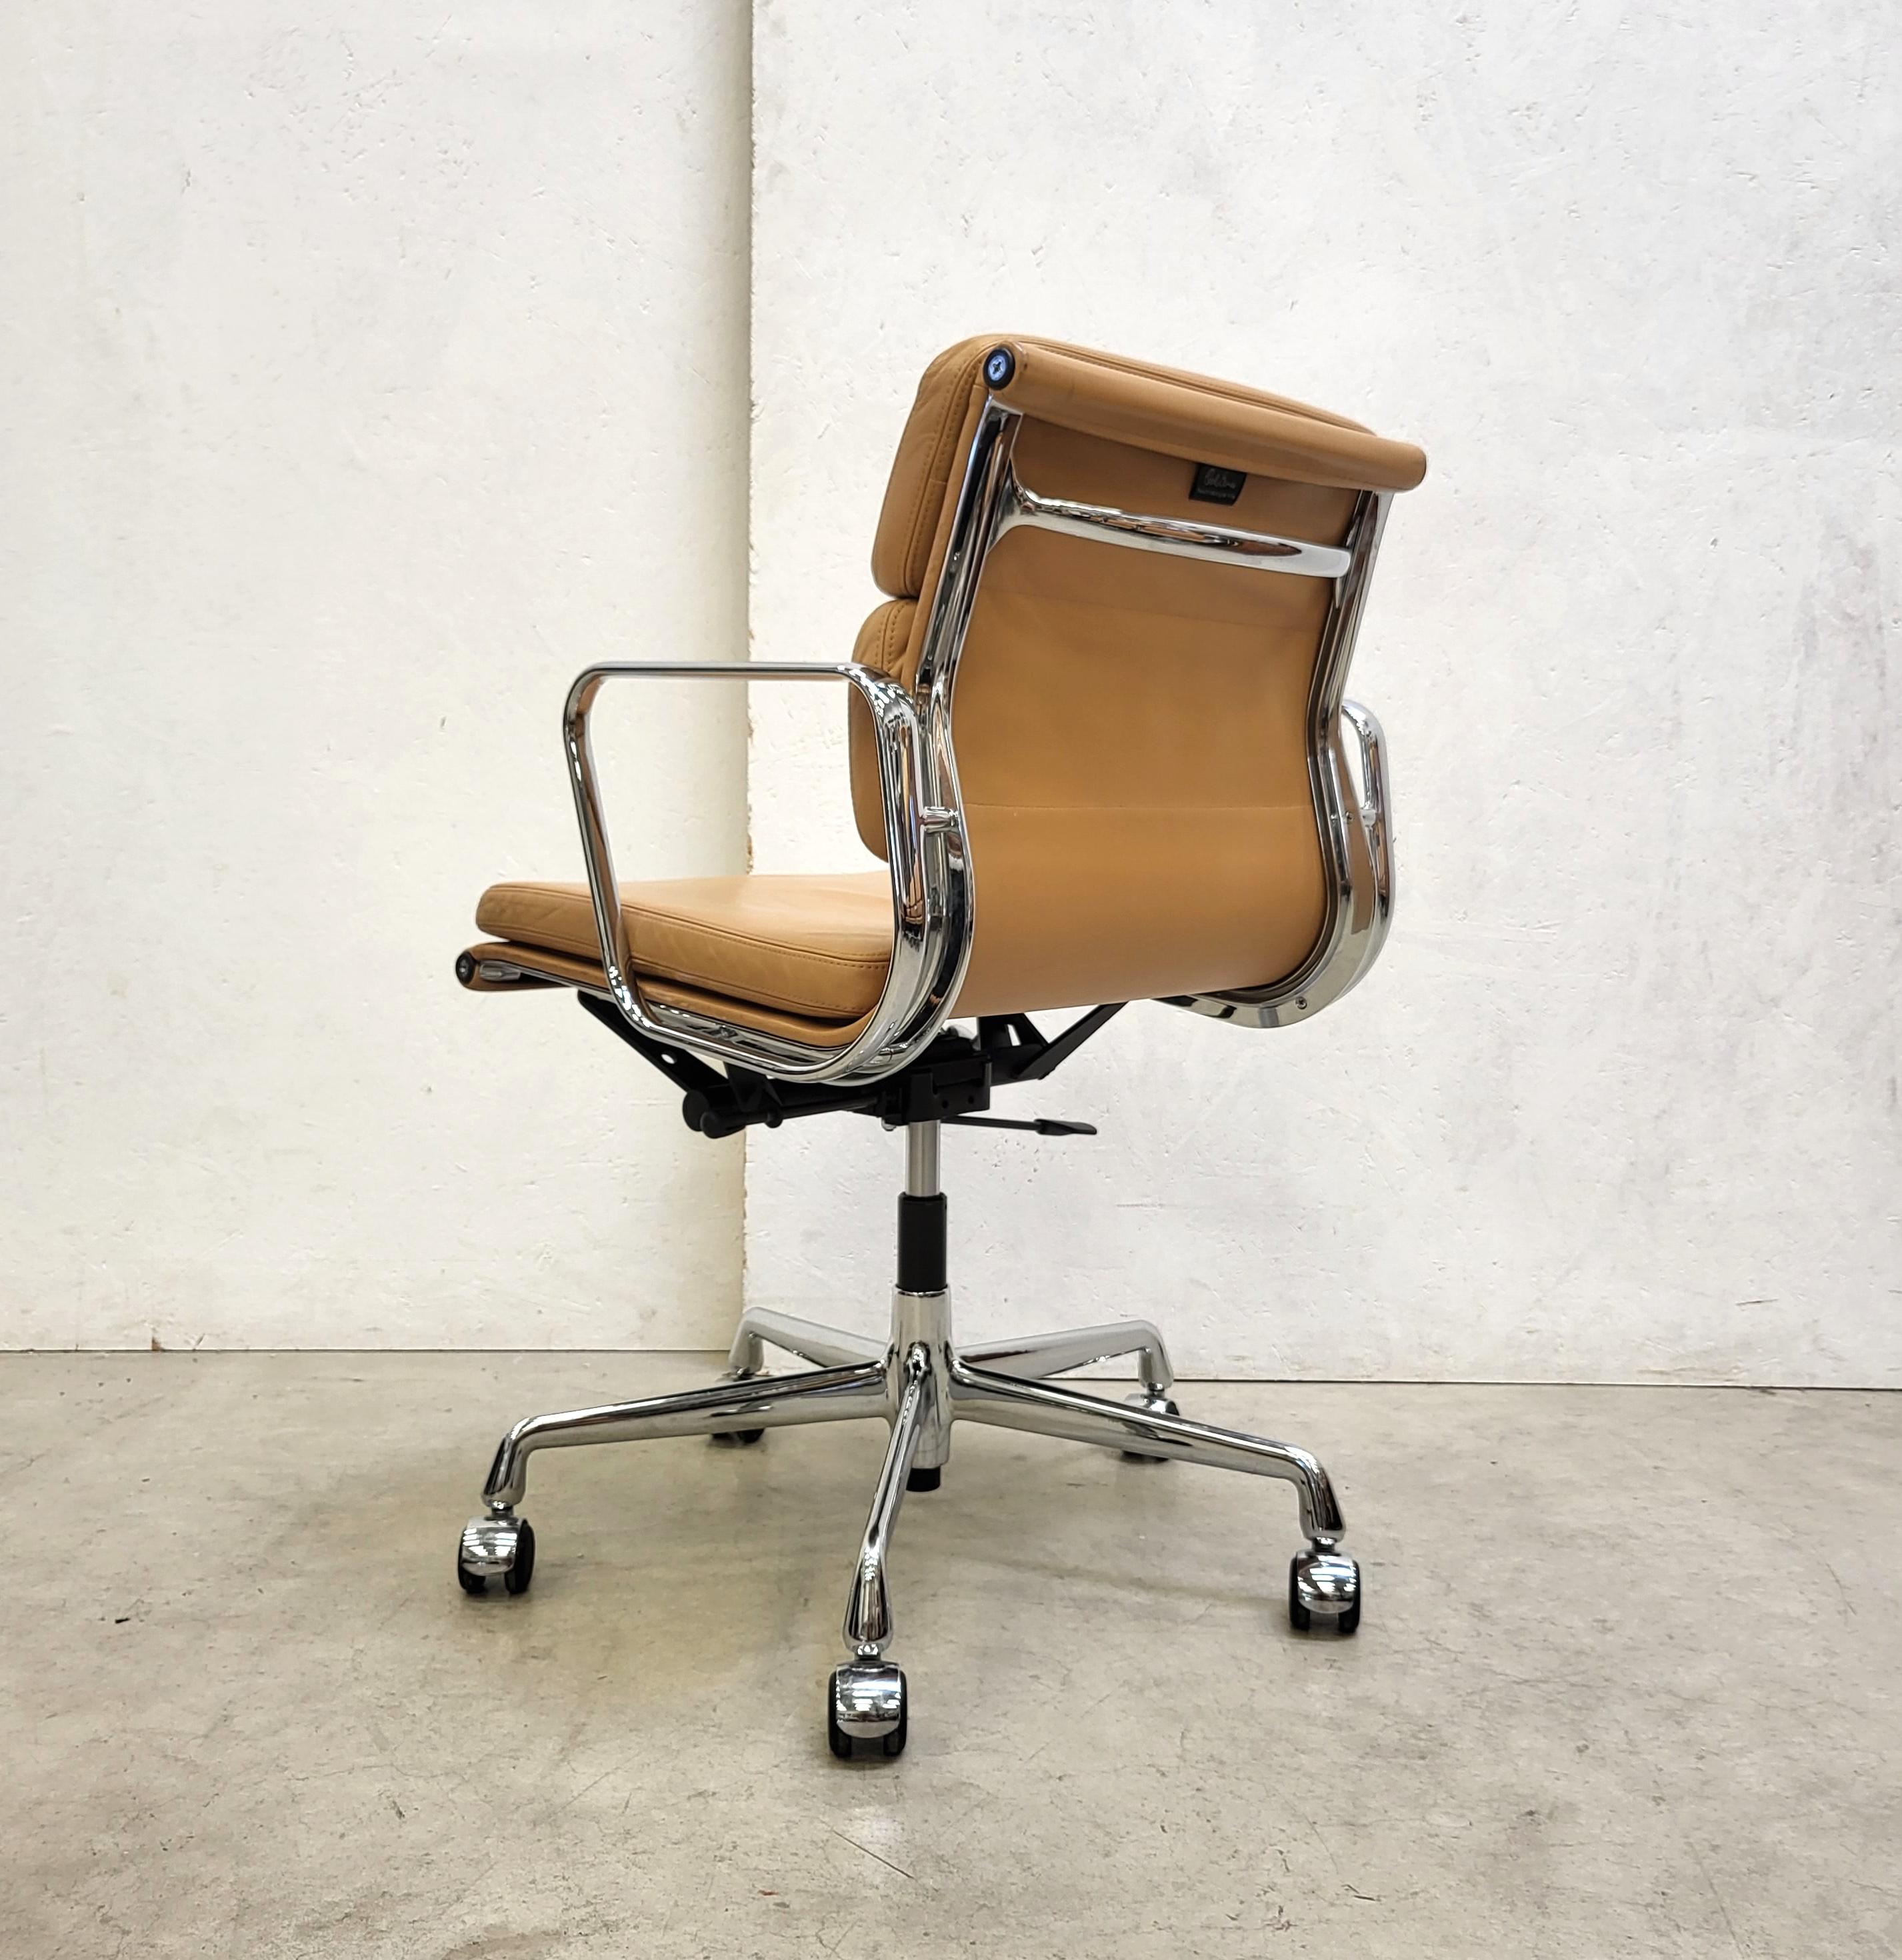 American Cognac Premium Vitra EA217 Soft Pad Office Chair by Charles Eames, 2000s